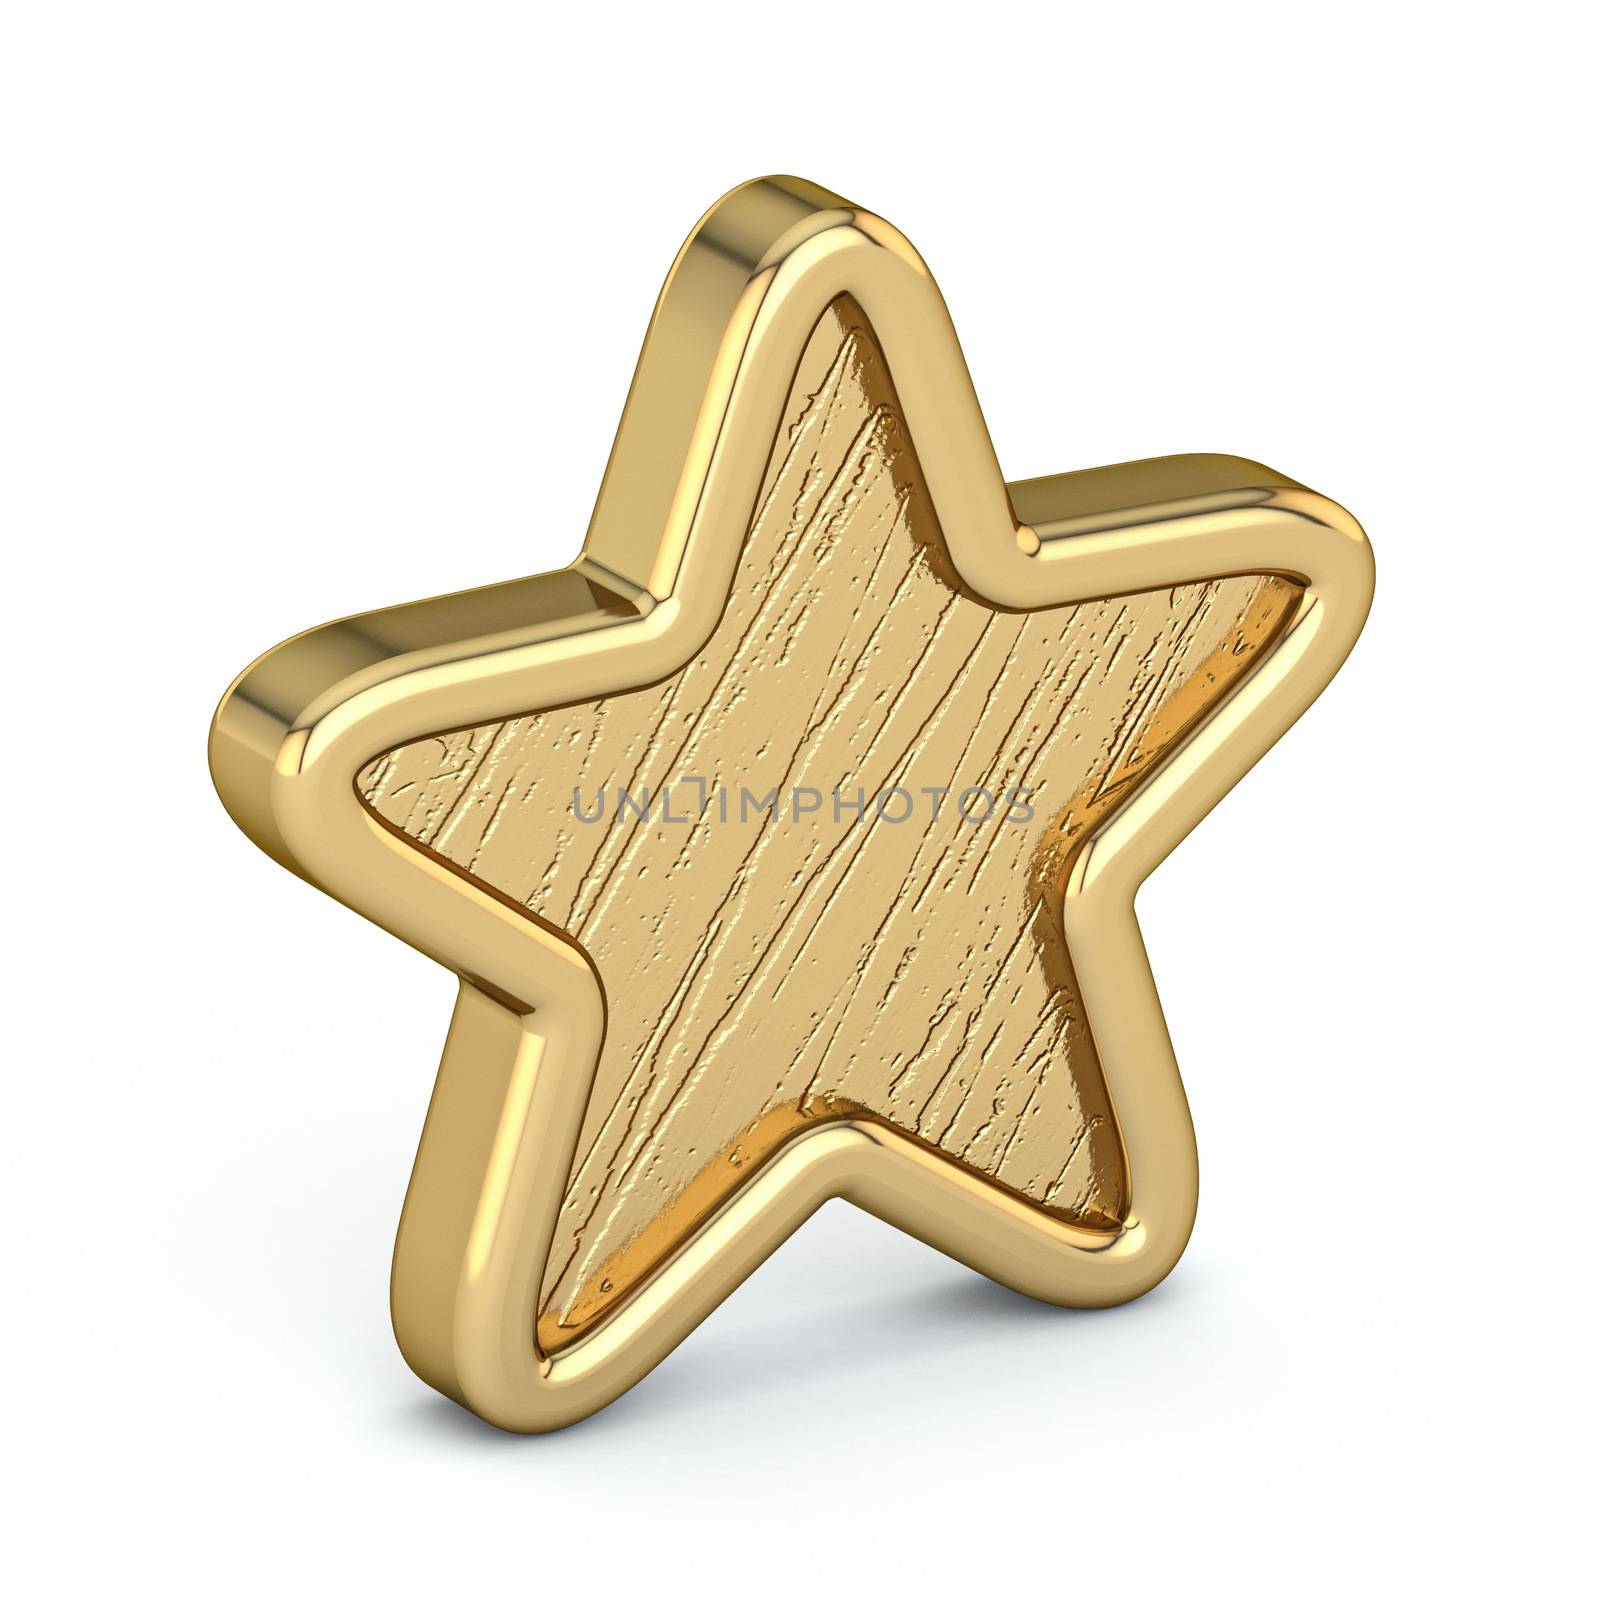 Golden star old, scratched 3D render illustration isolated on white background